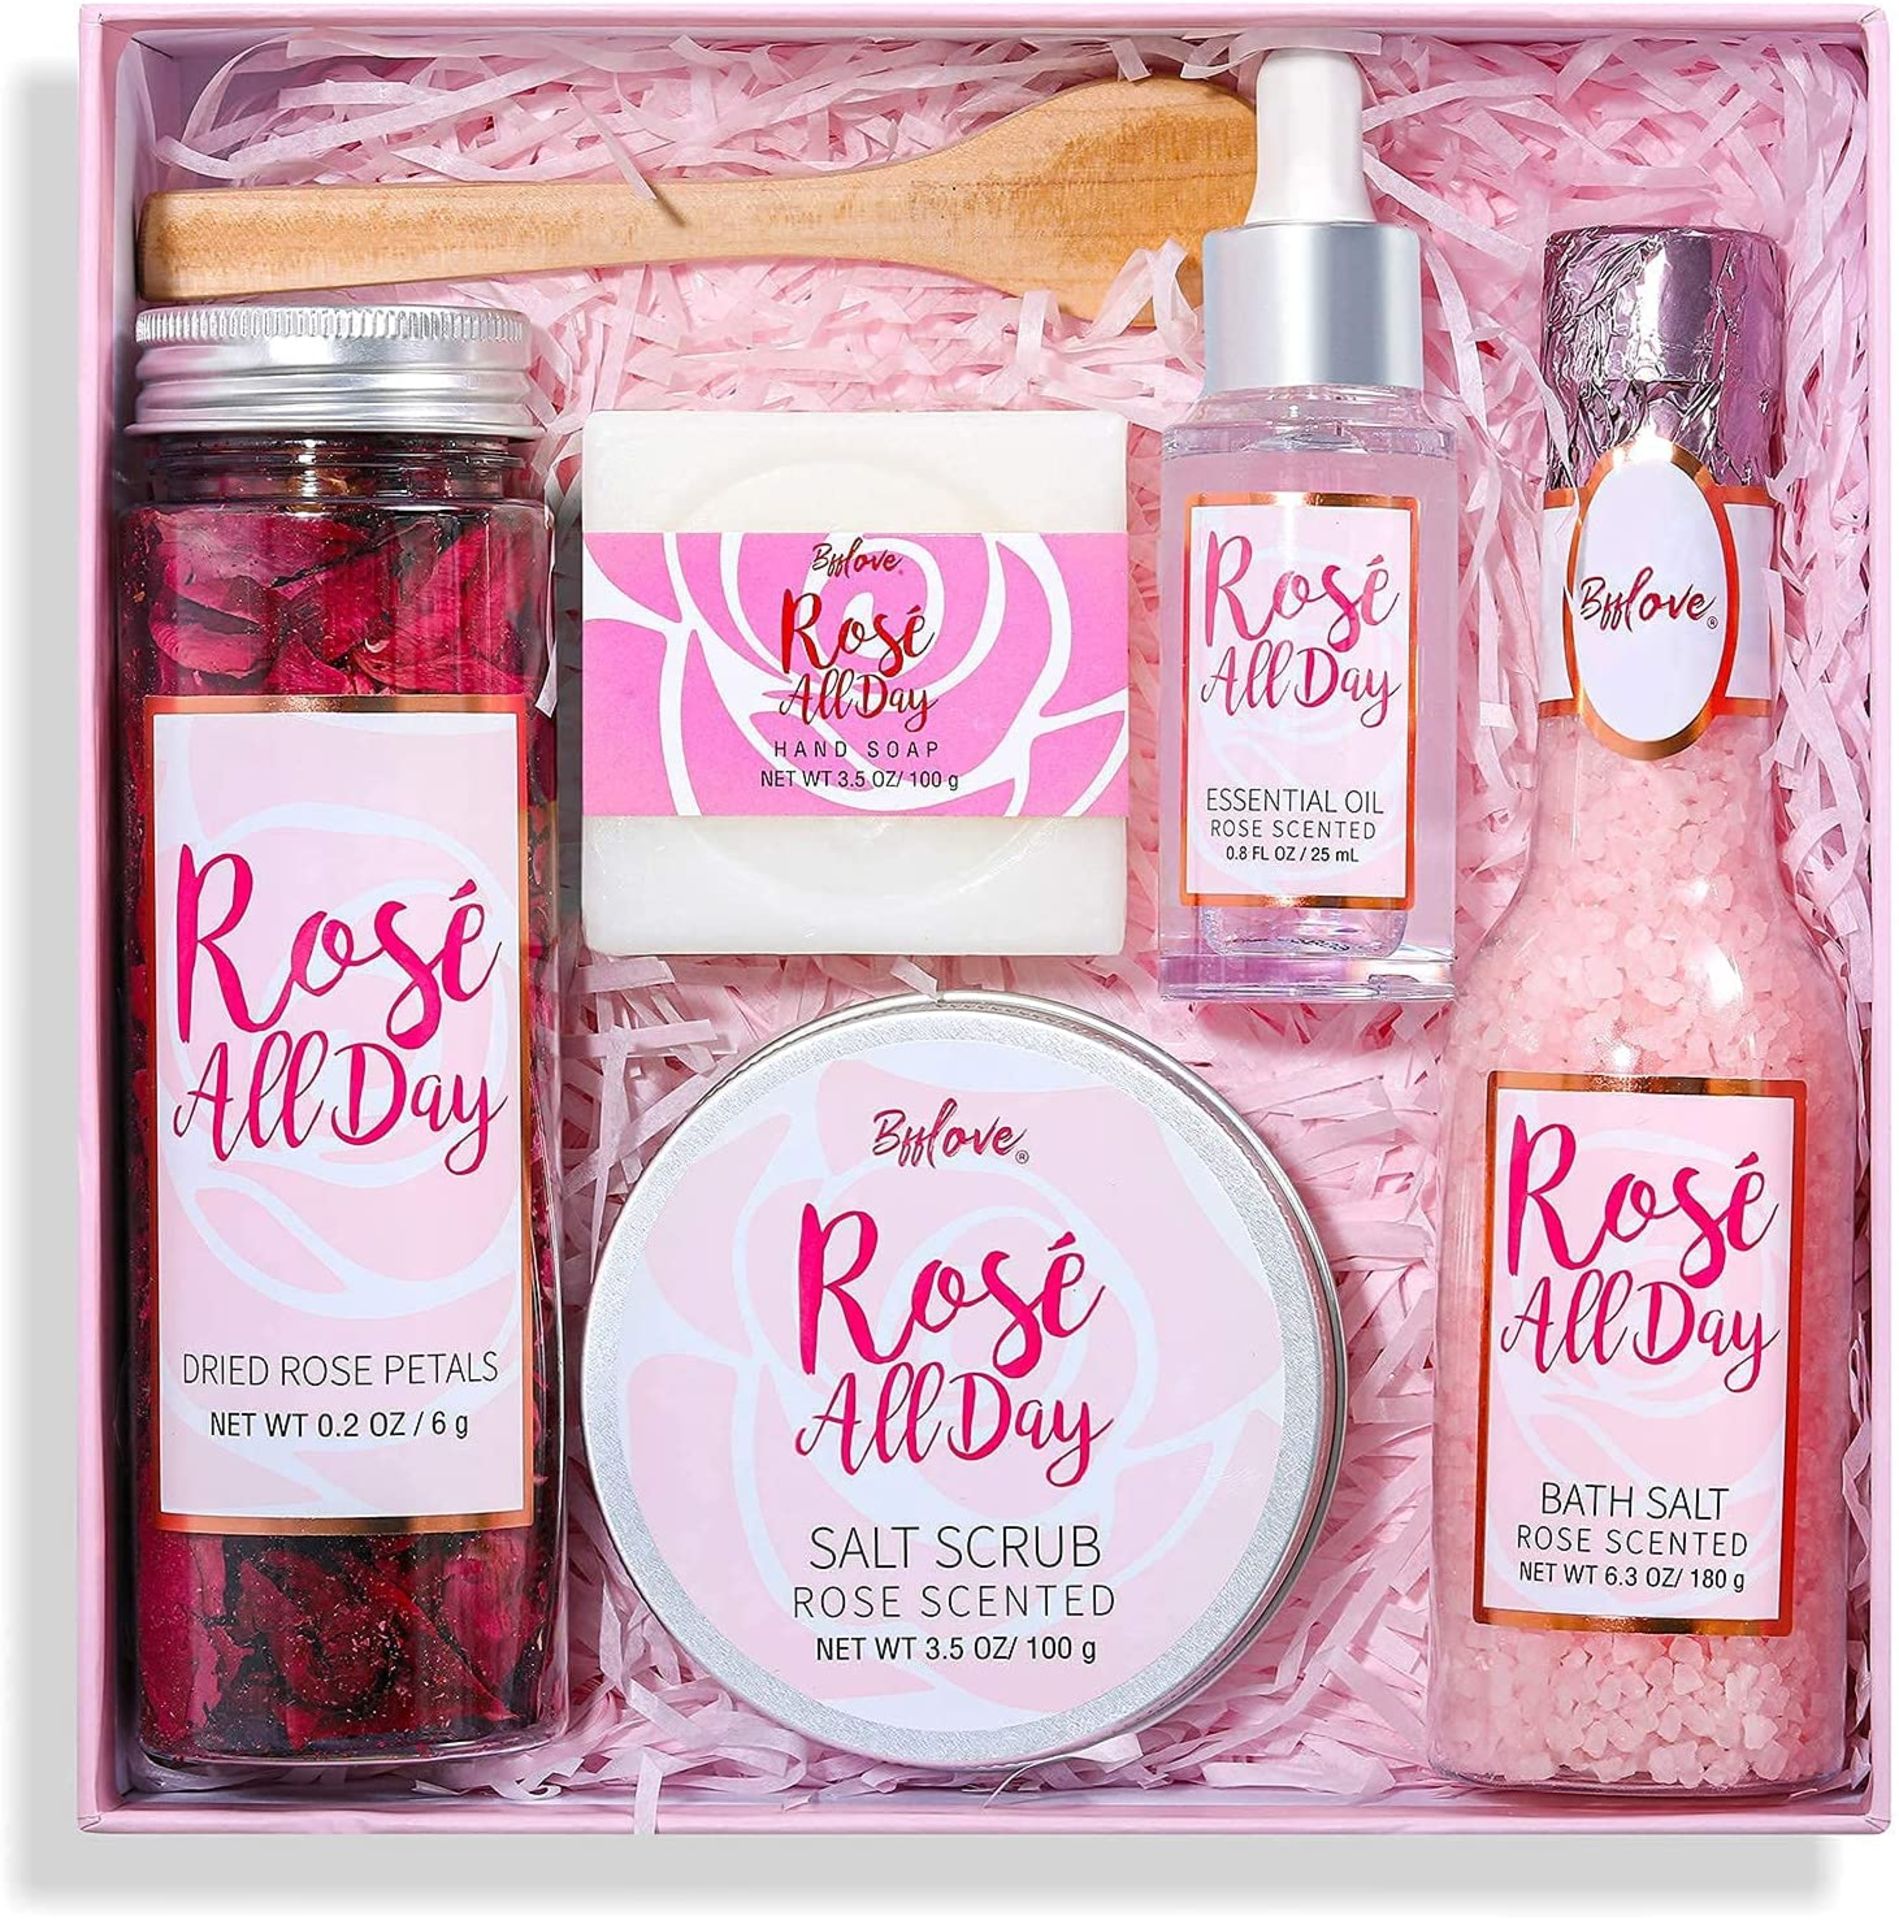 NEW PACKAGED Rose All Day Bath Gift Box - Image 2 of 2